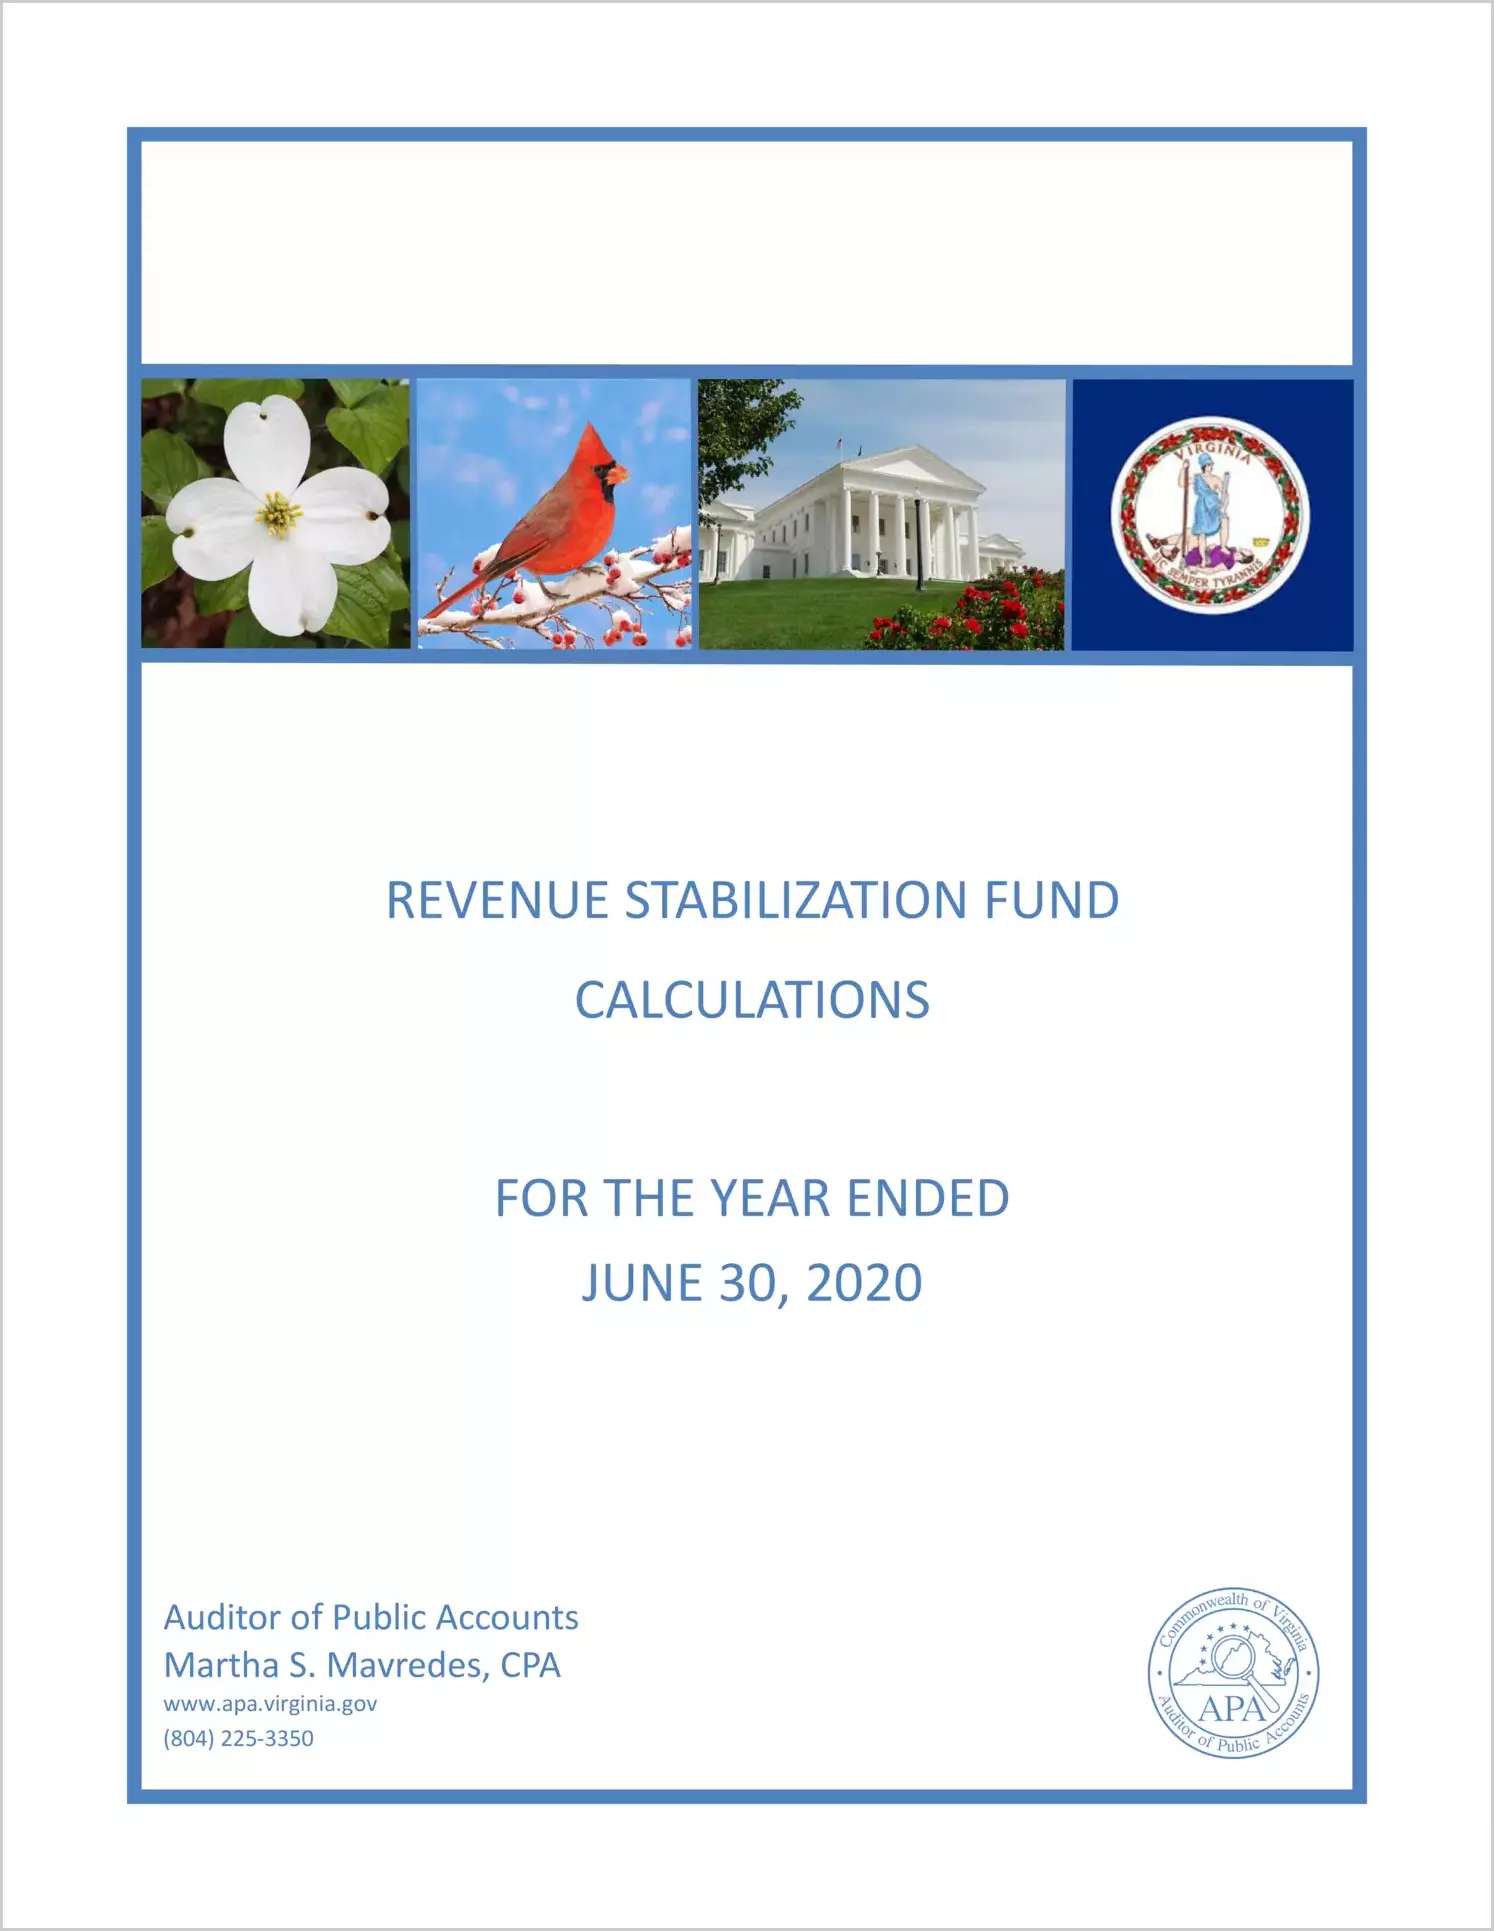 Revenue Stabilization Fund Calculations for the year ended June 30, 2020